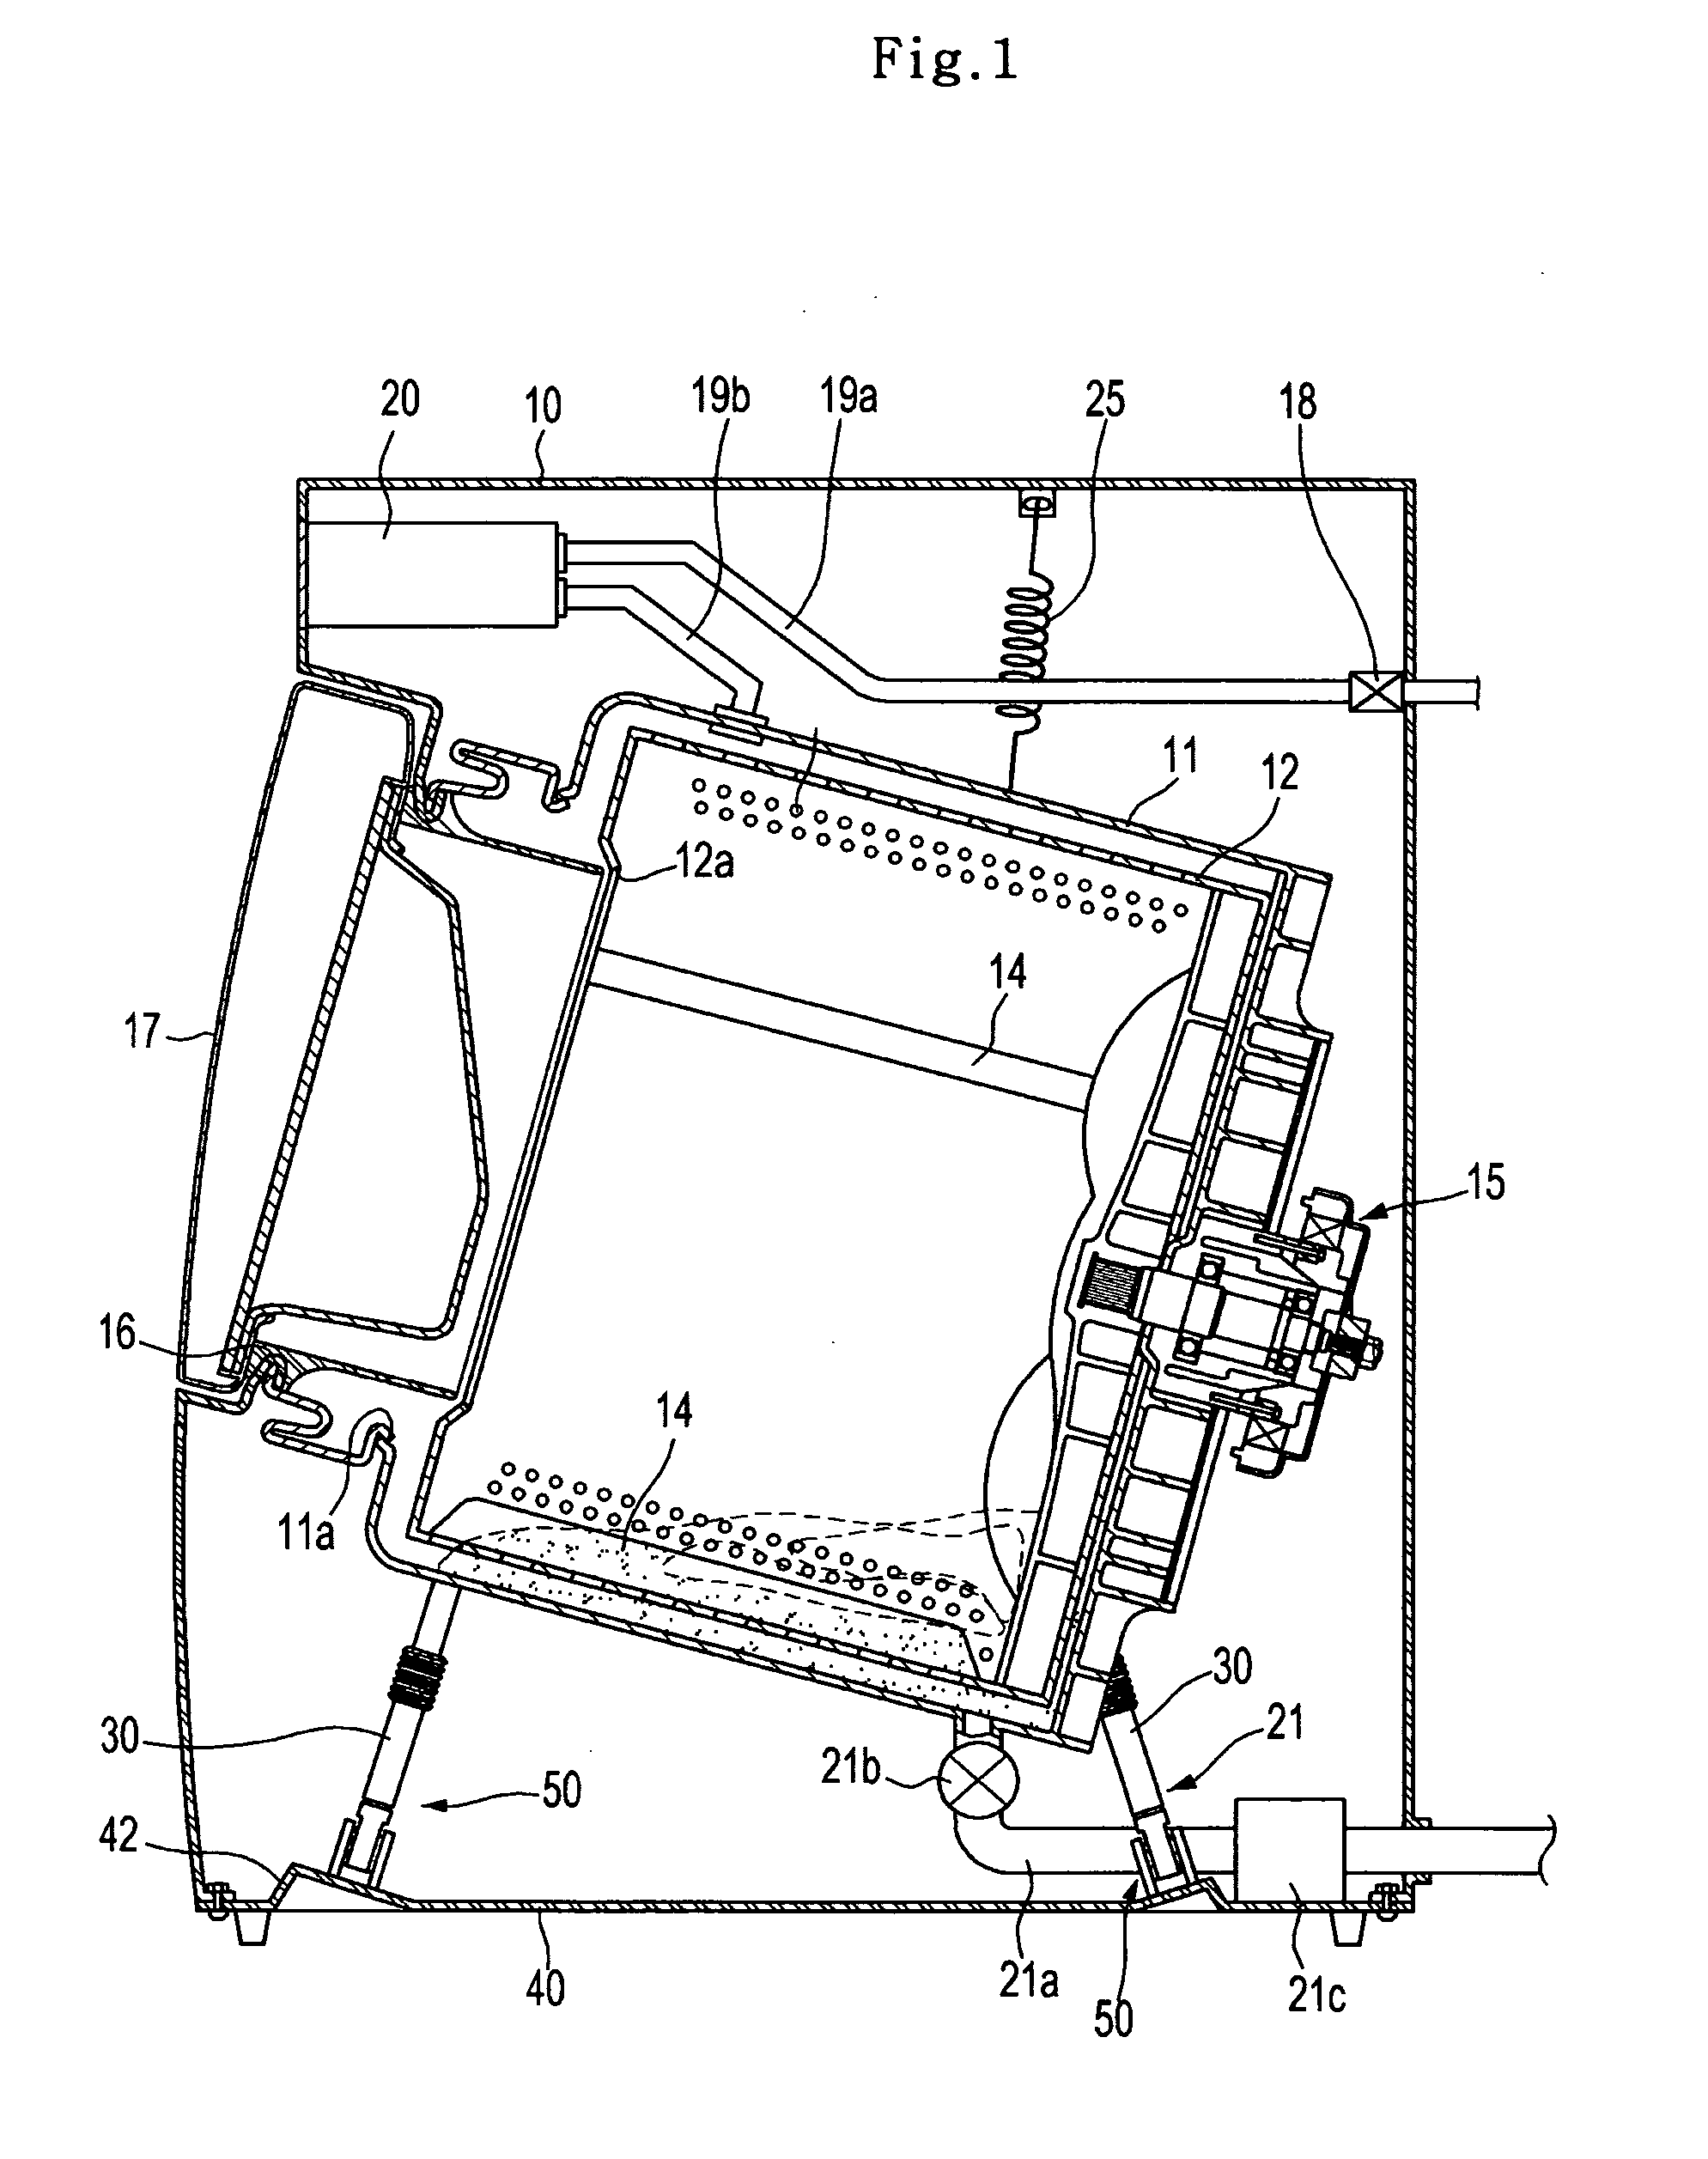 Washing and/or drying machine having a damper connecting structure including a reinforcing portion